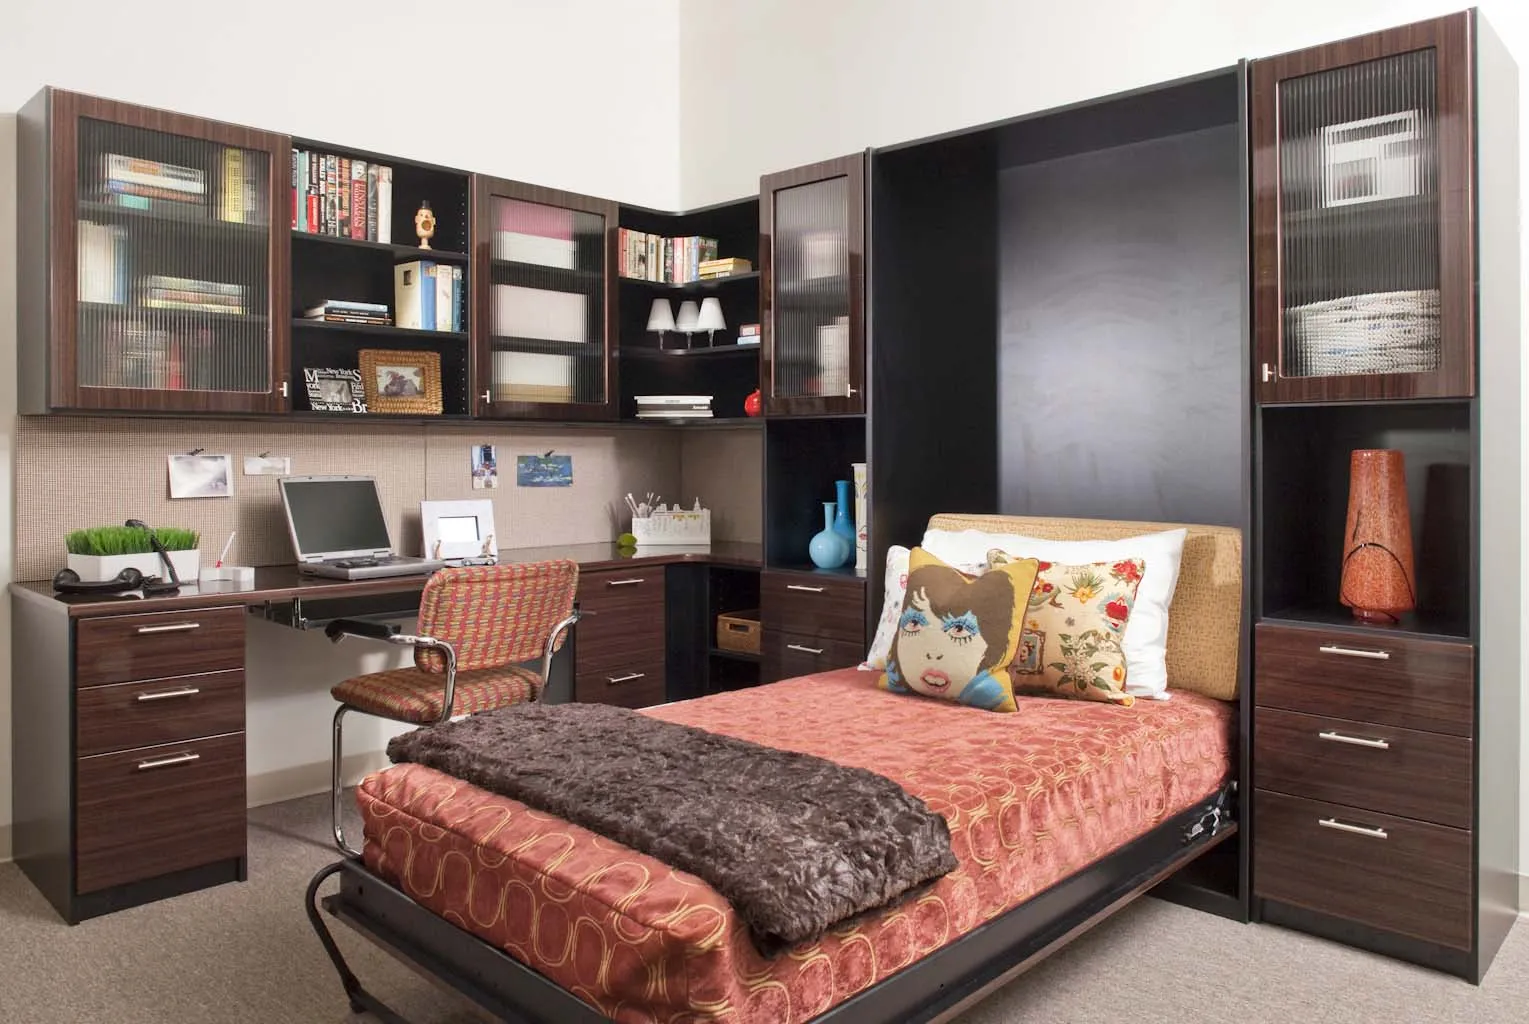 Short on Space for Out of Town Guests? Try a Murphy Bed!